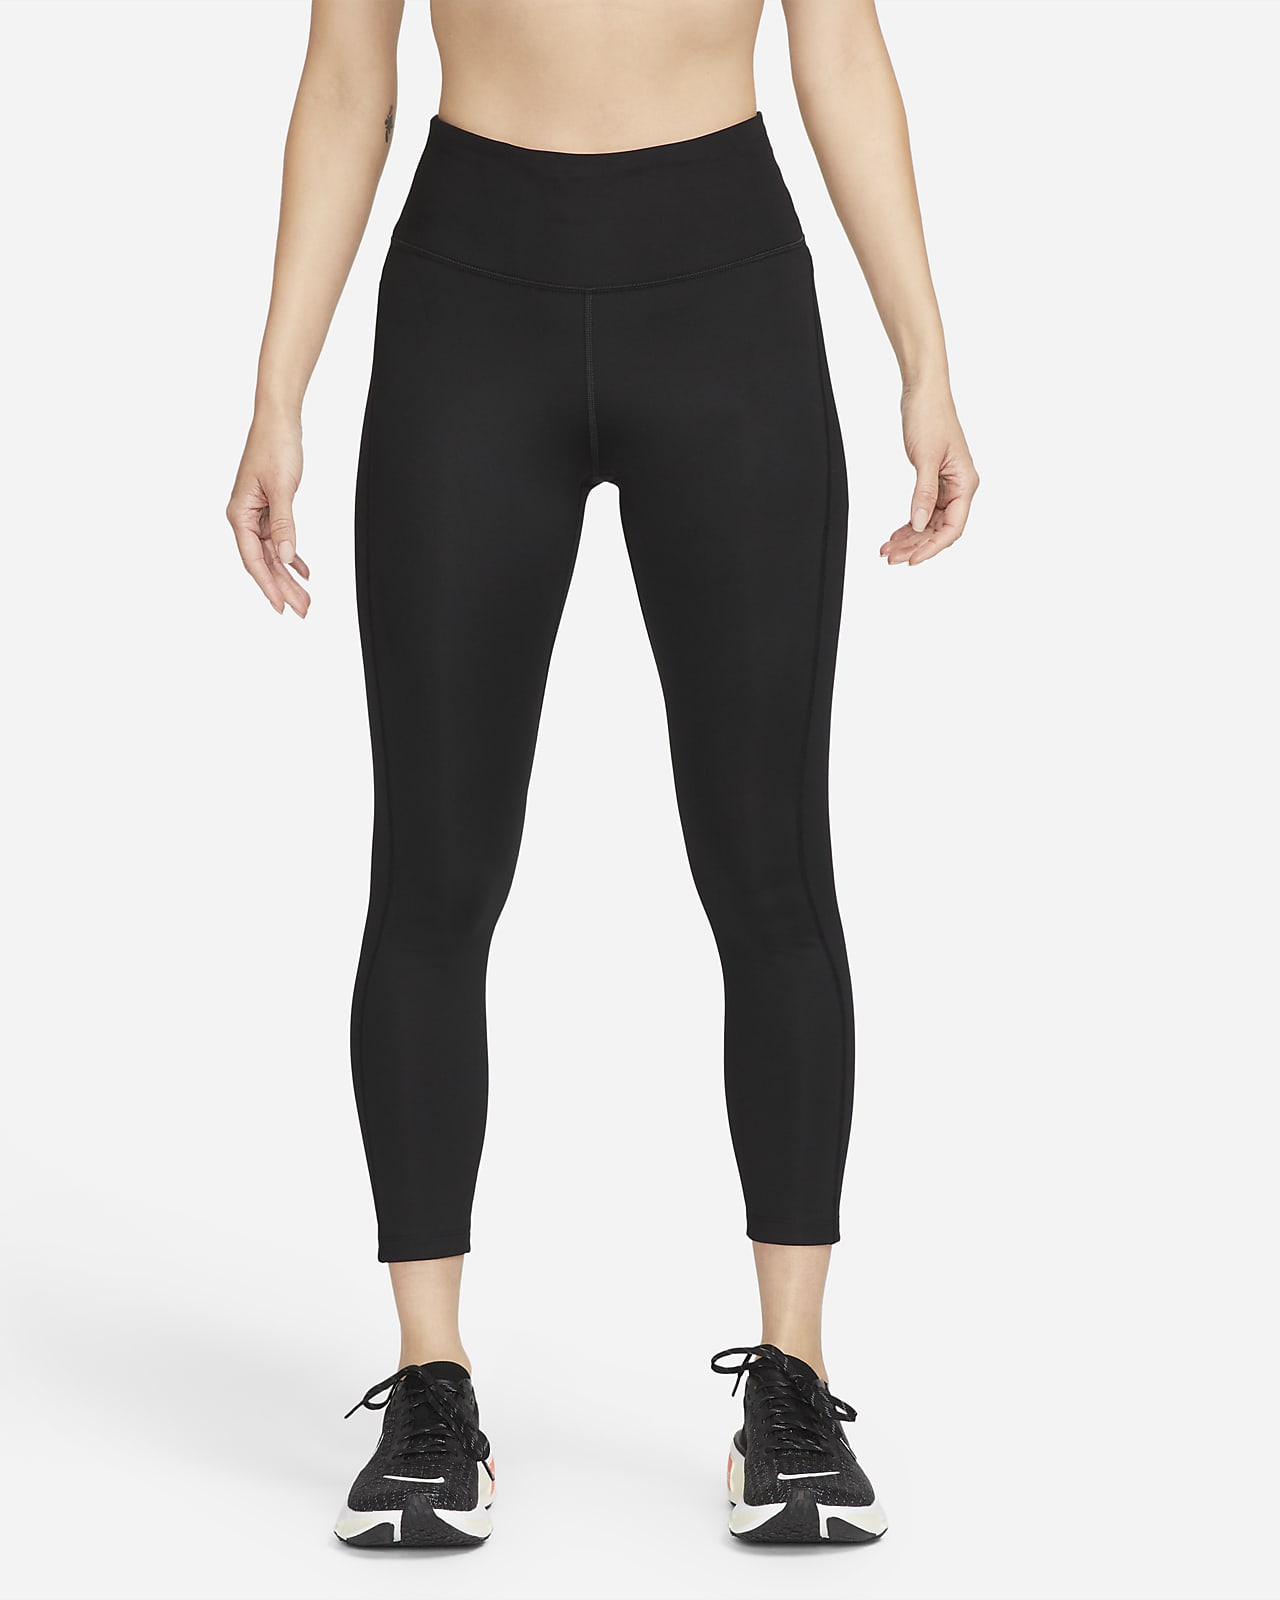 Lululemon Product Drops for Australia/New Zealand, Asia, and Europe